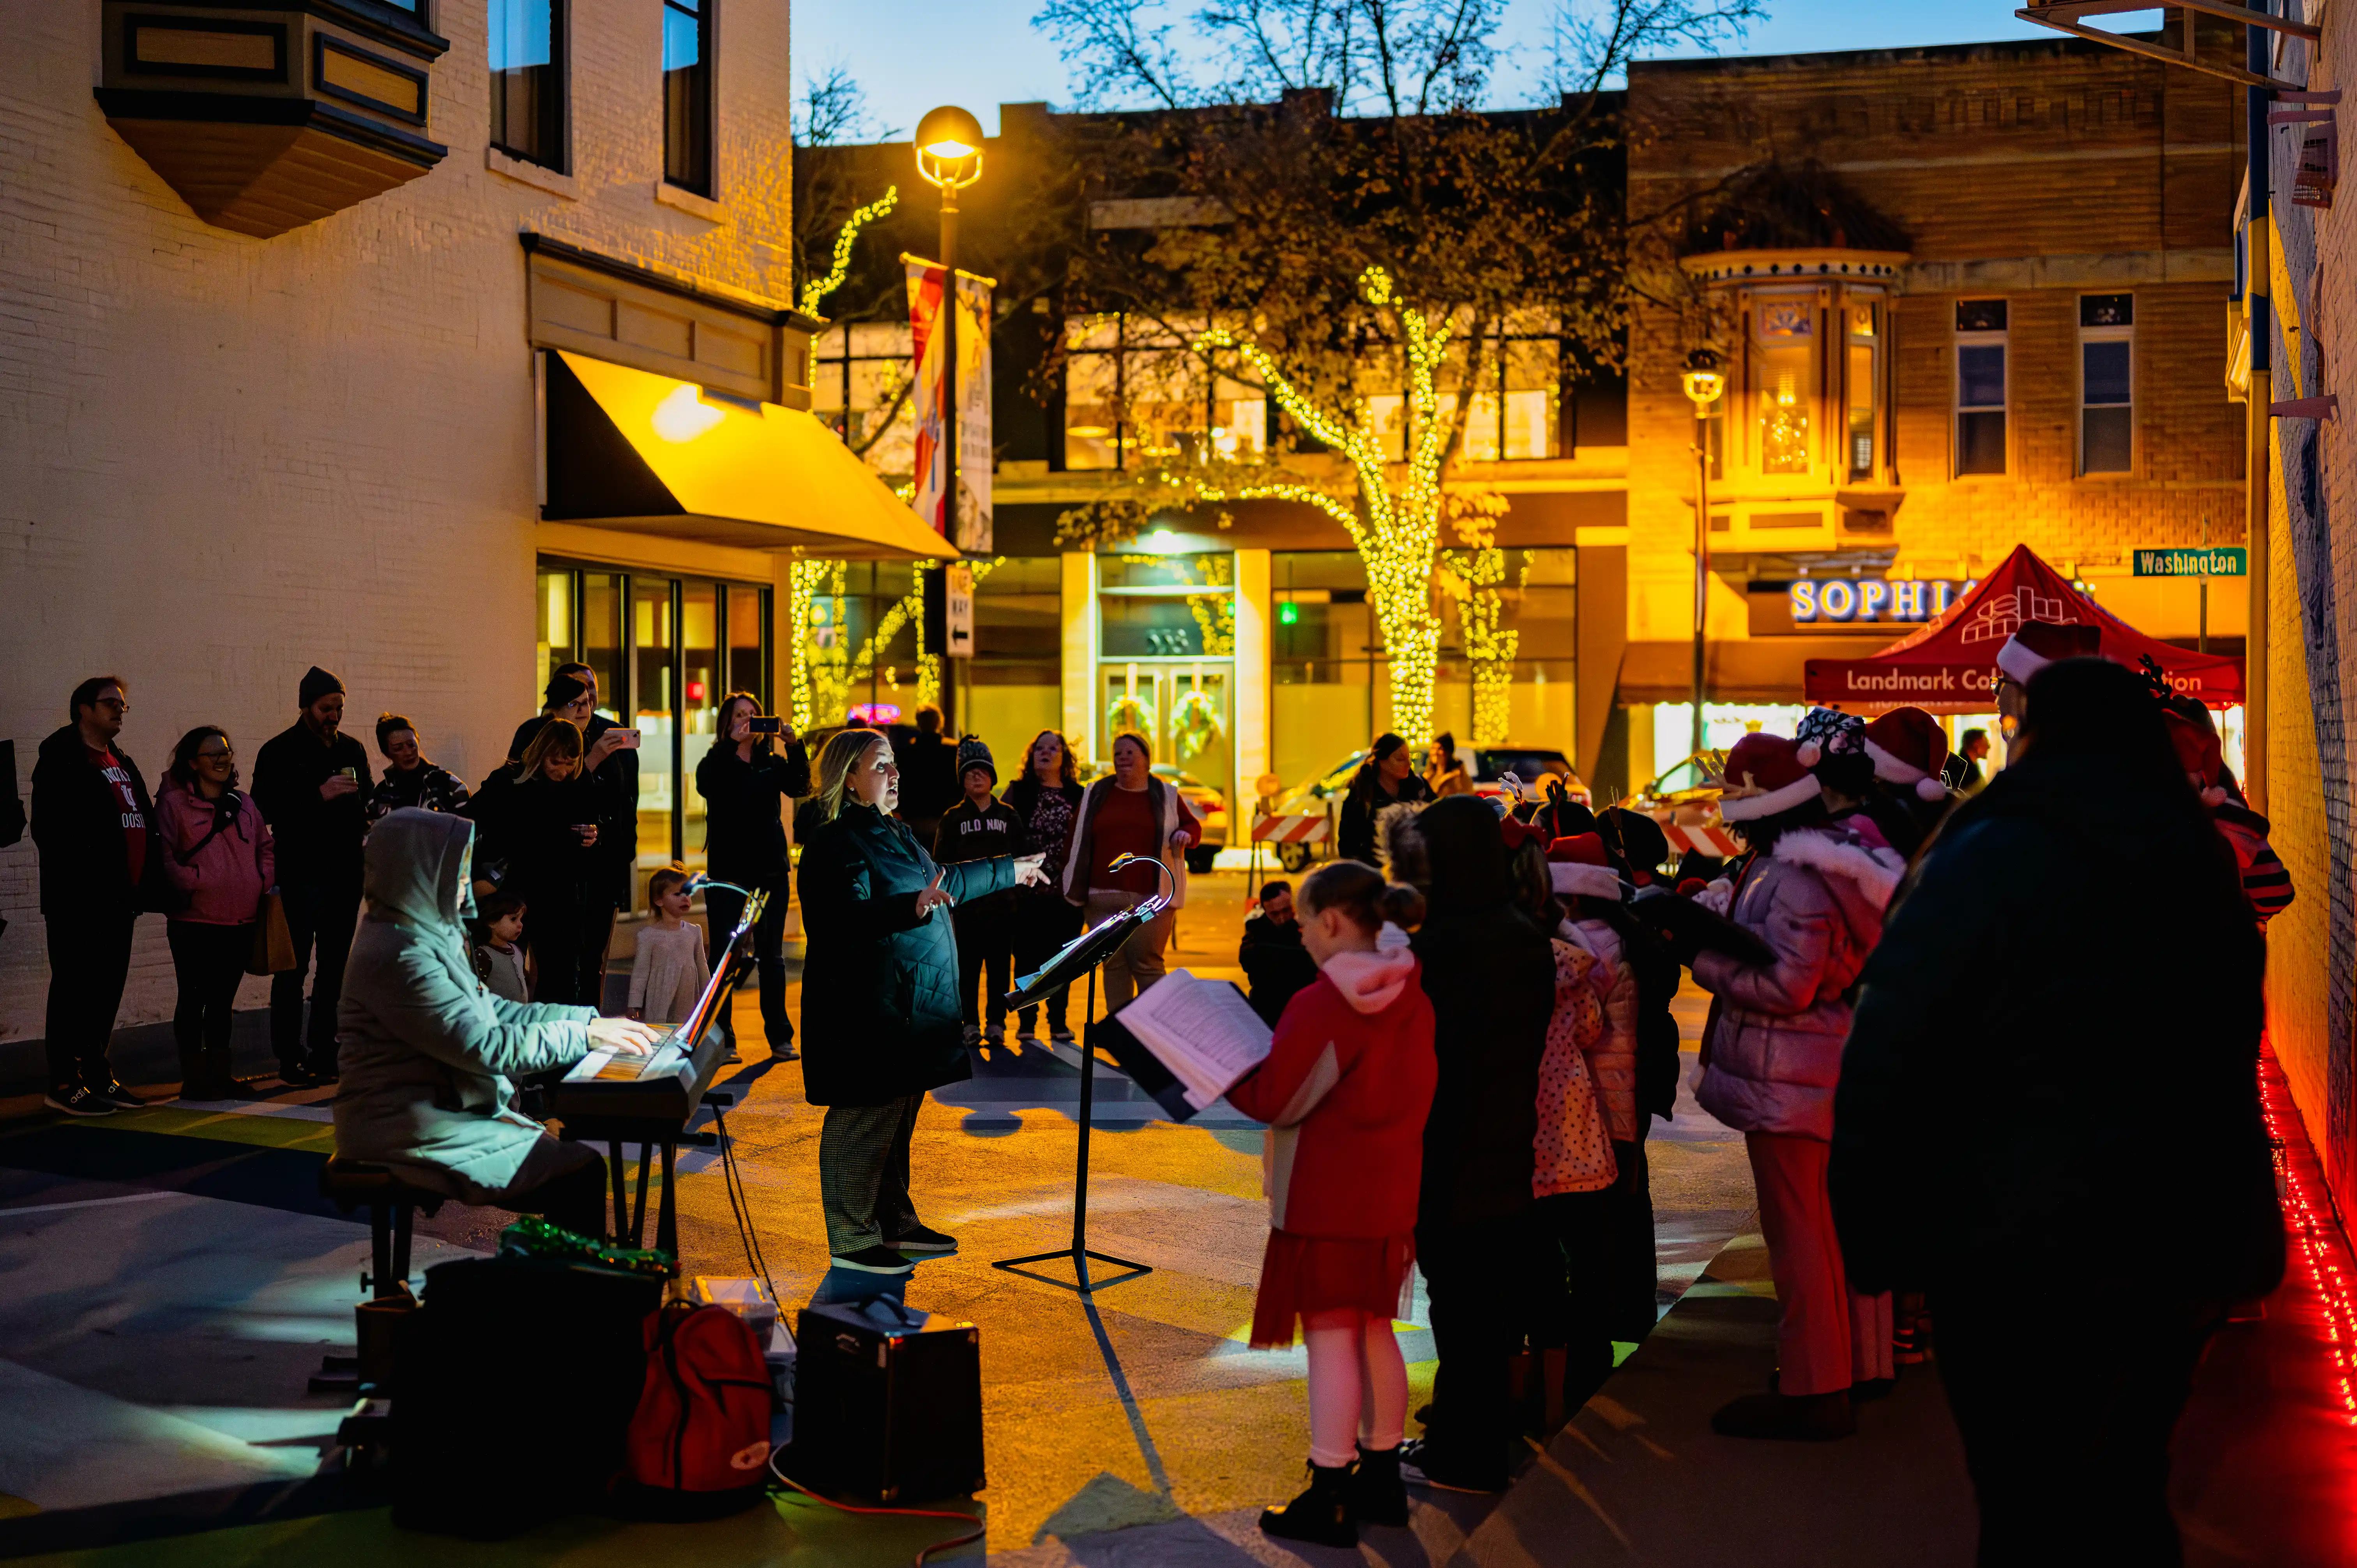 A group of people gathered for an outdoor evening event with someone playing a keyboard, surrounded by festive lights and holiday decorations.